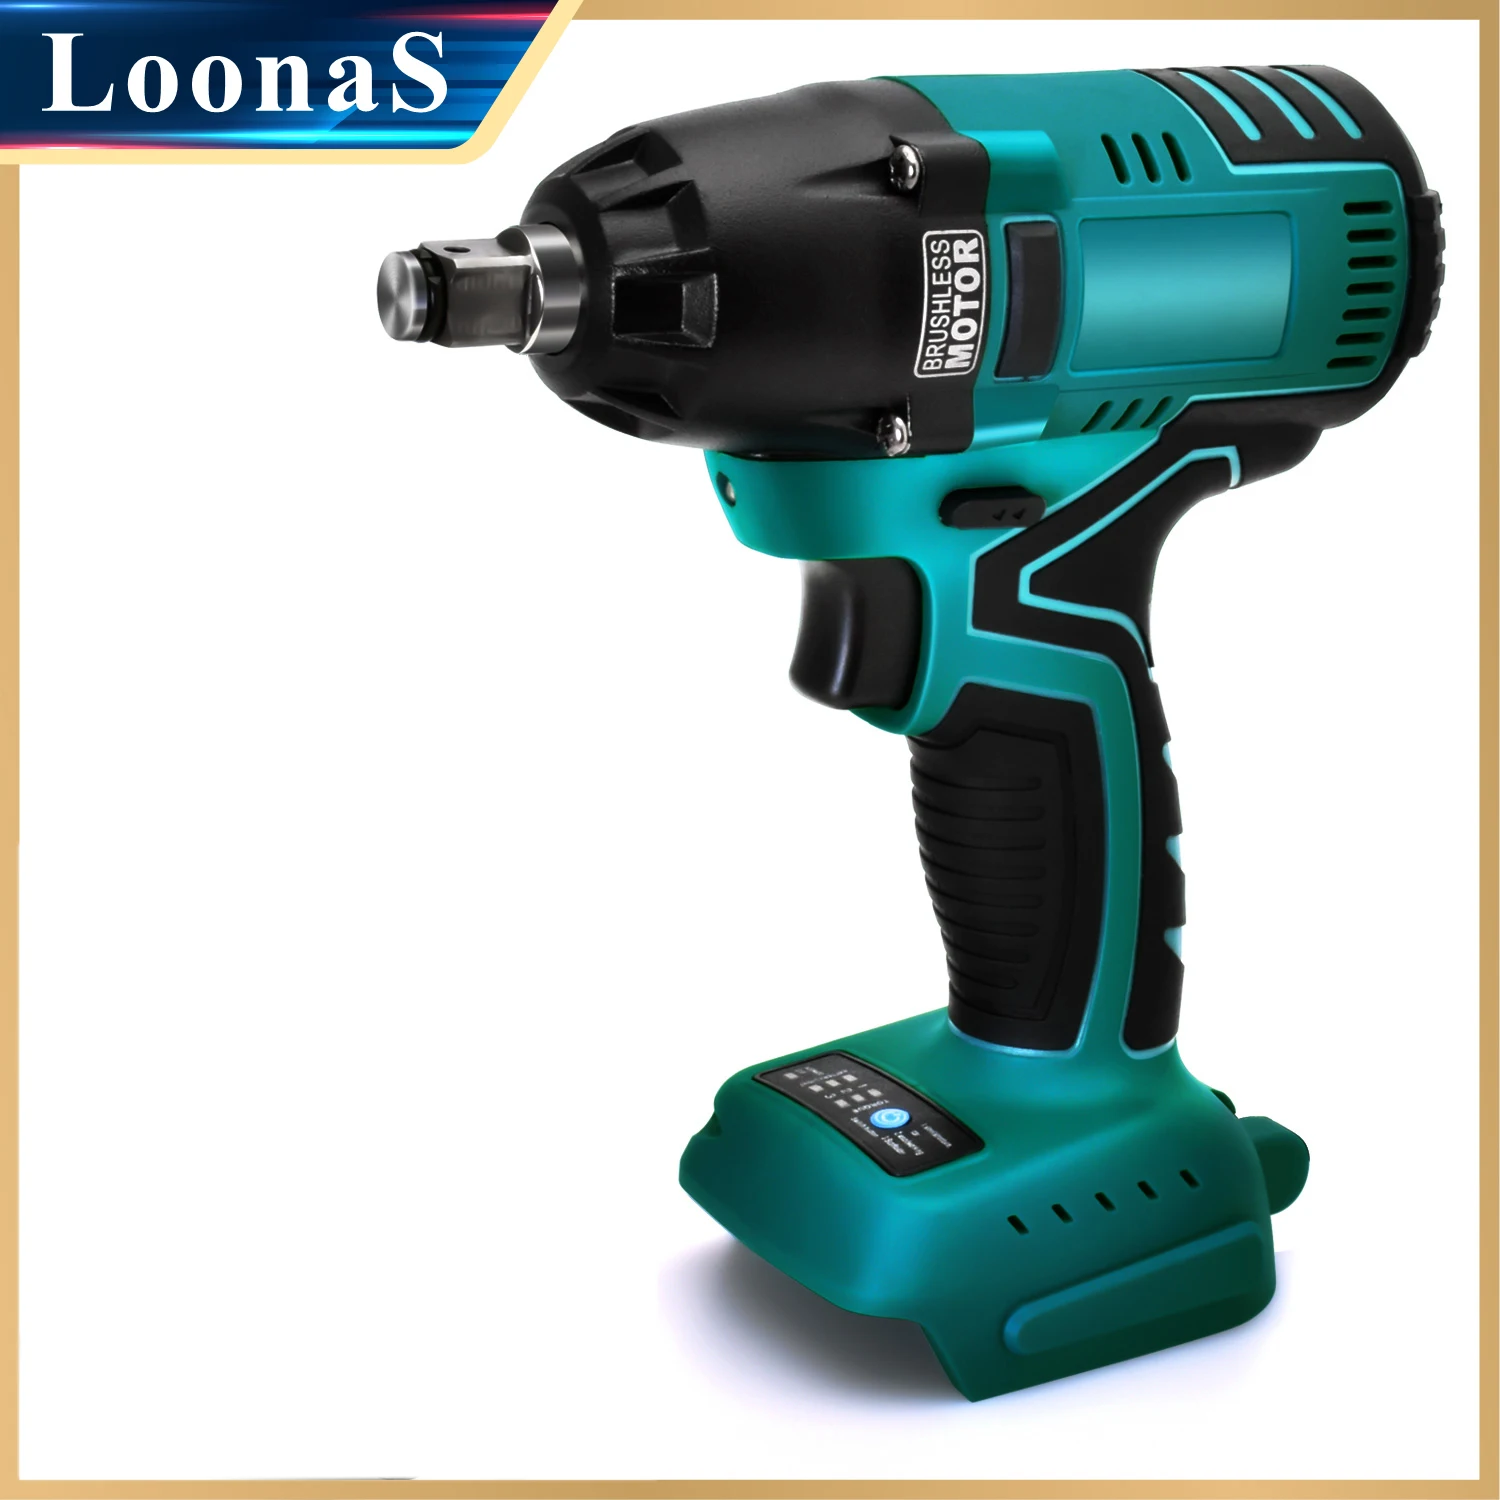 Loonas Cordless Electric Wrench Brushless Motor 400N.m High Torque LED Impact Lithium-Ion Battery Power Tools(without battery)